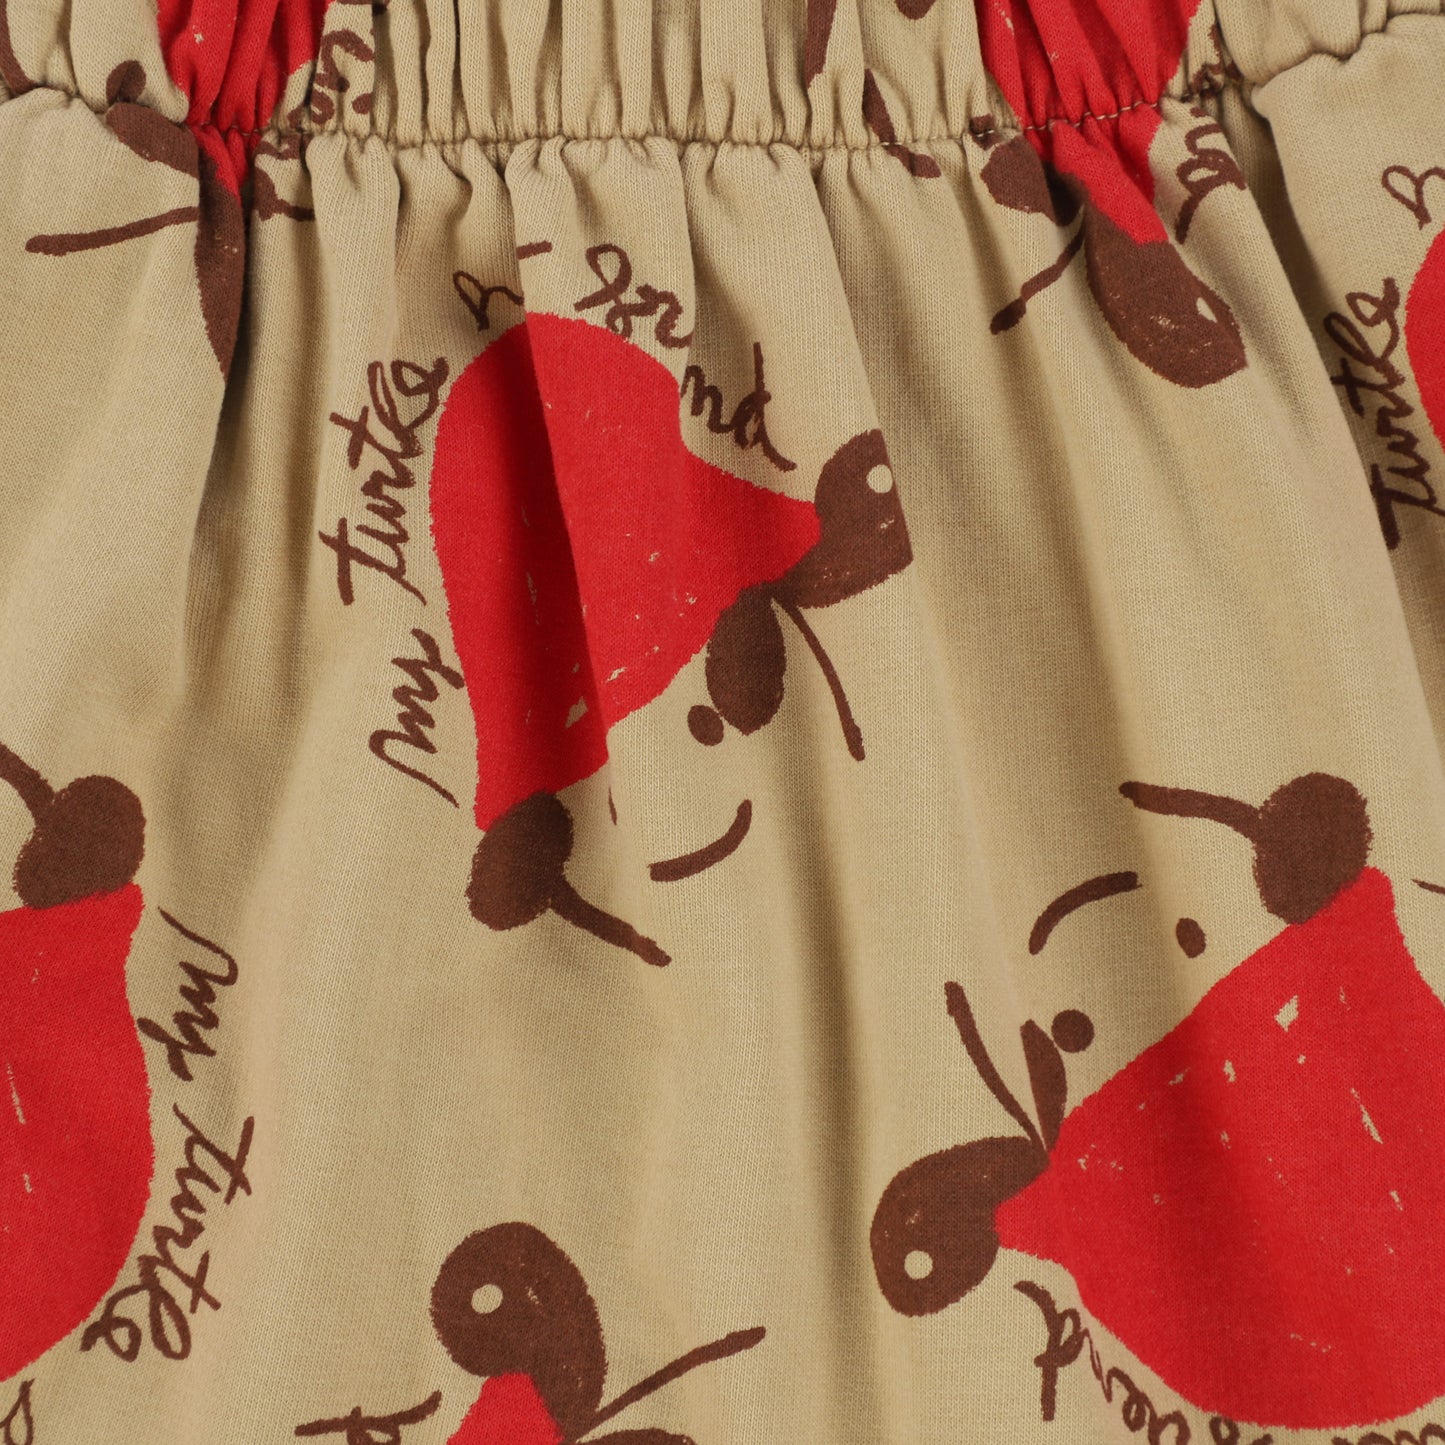 Weekend House Sand Turtle Allover Print Skirt [Final Sale]